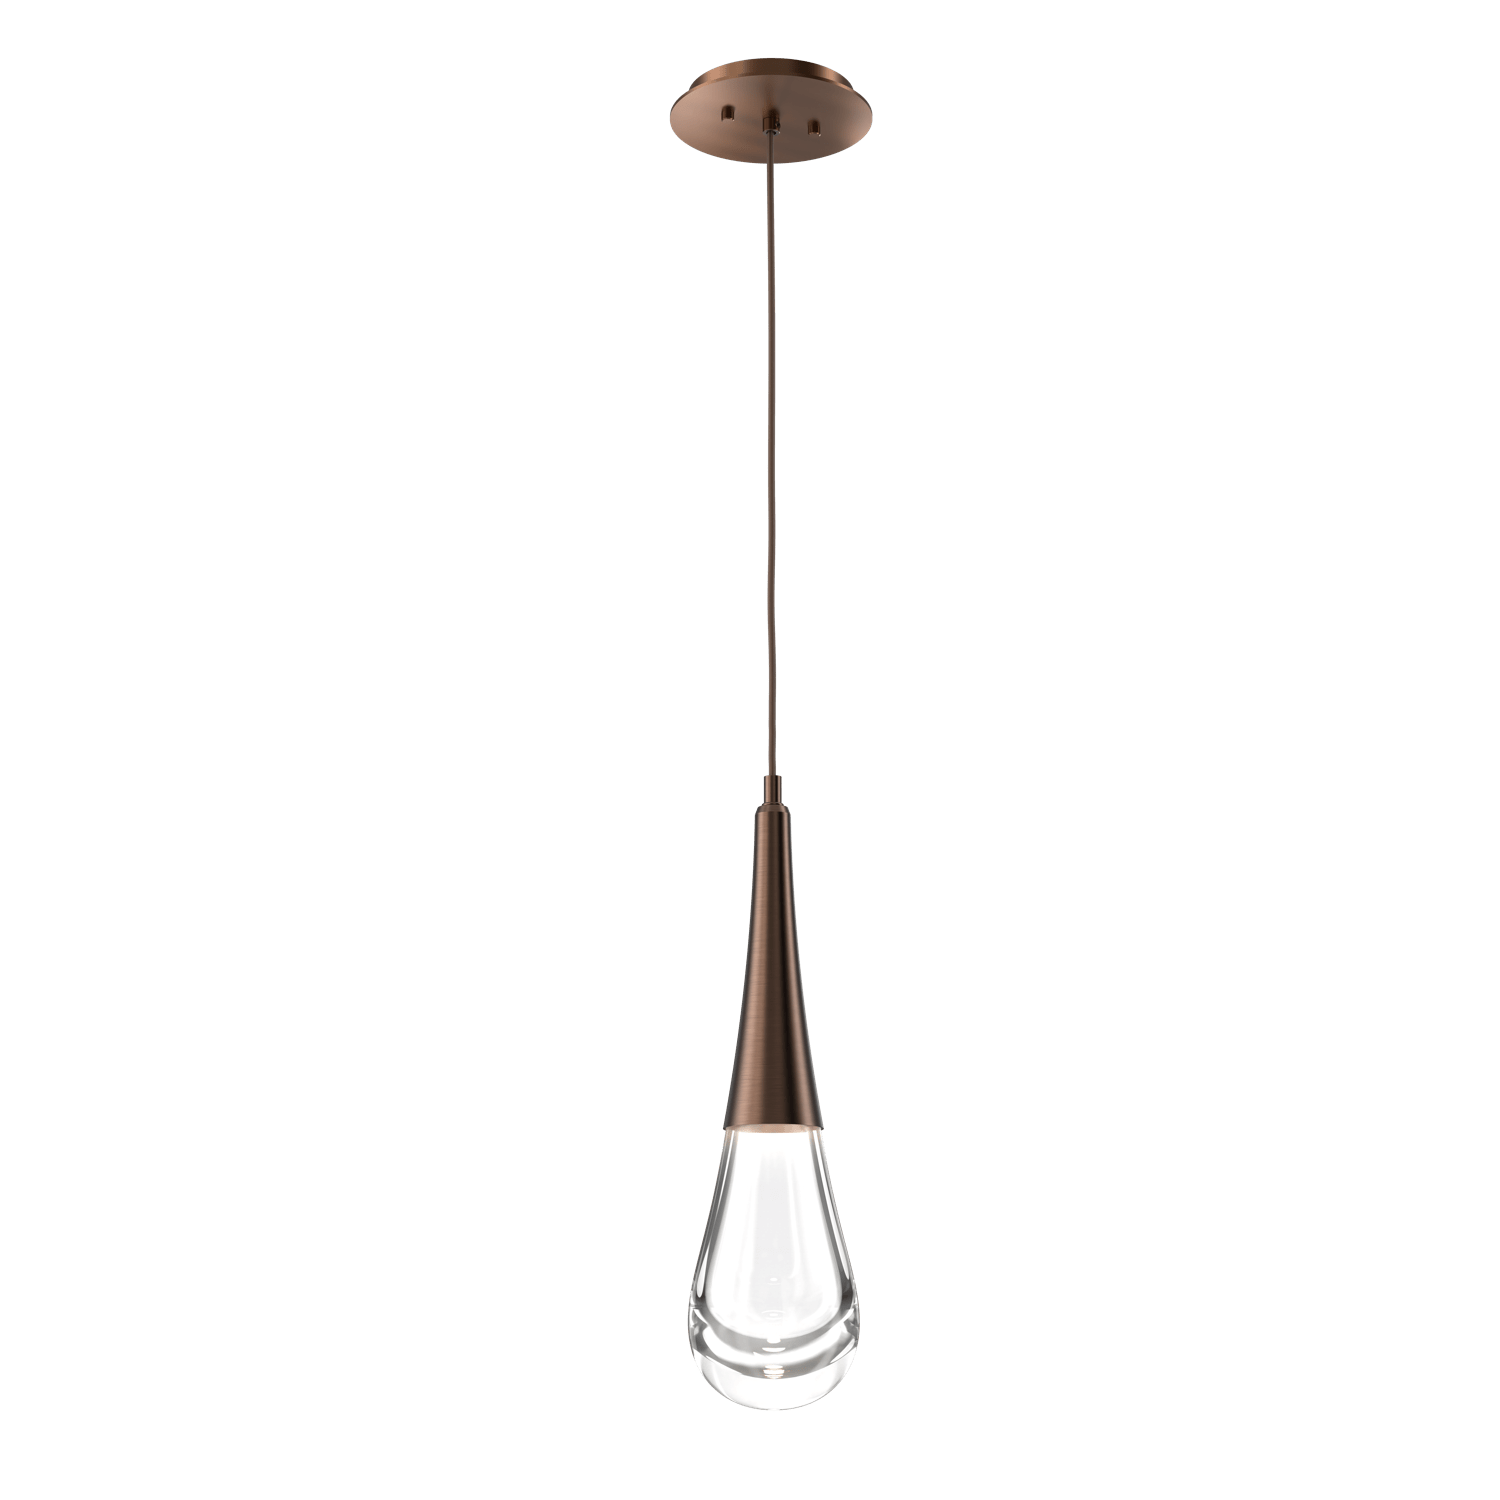 LAB0078-01-RB-Hammerton-Studio-Raindrop-pendant-light-with-oil-rubbed-bronze-finish-and-clear-blown-glass-shades-and-LED-lamping